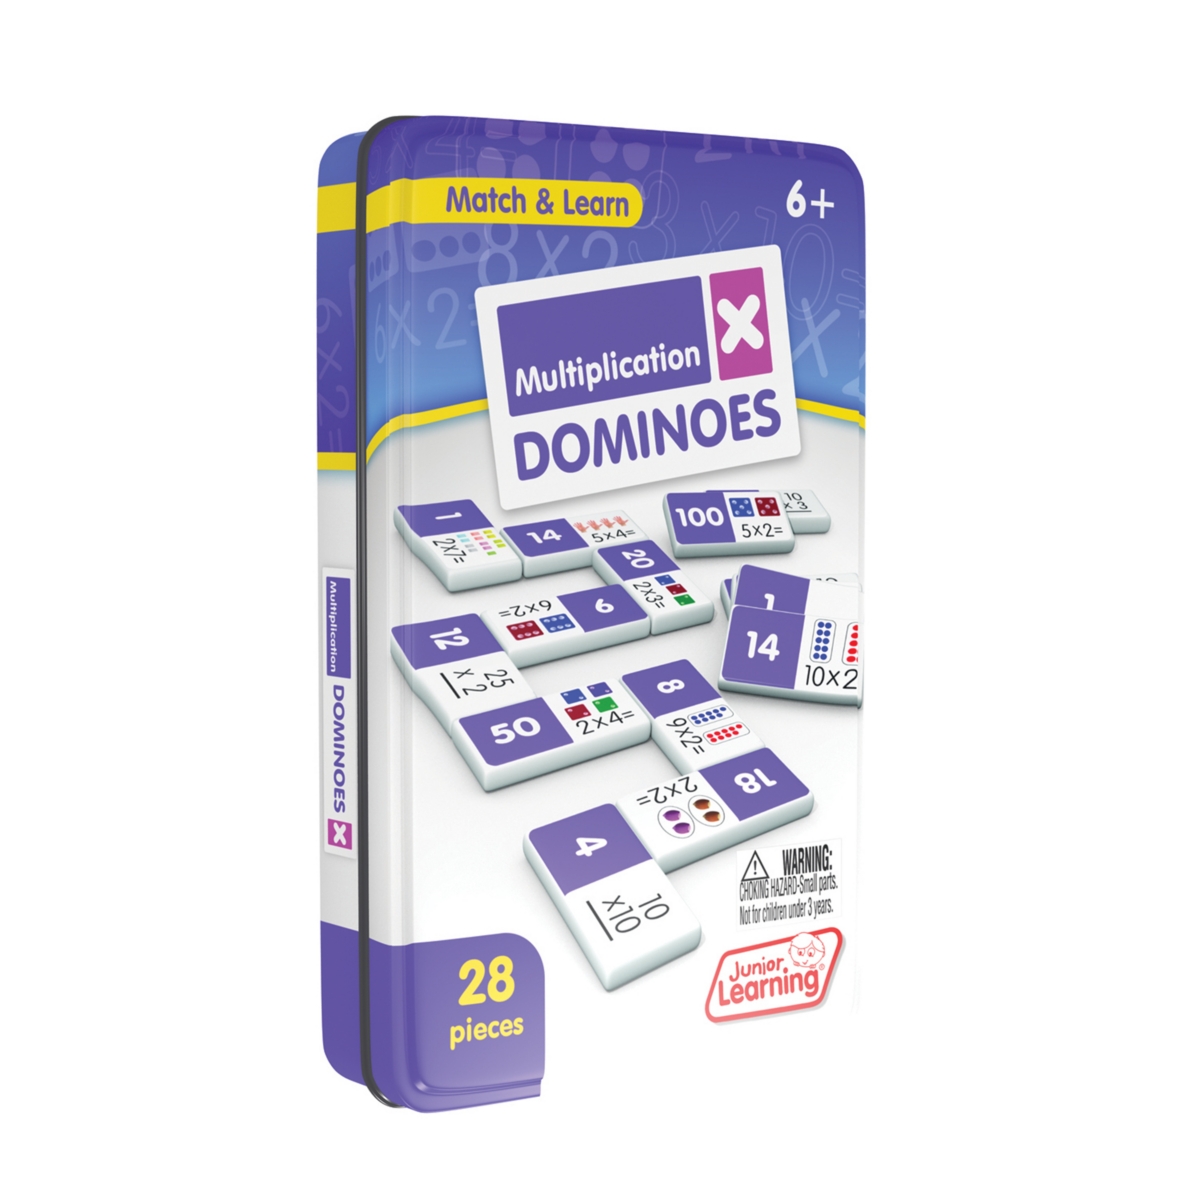 Junior Learning Kids' Multiplication Dominoes Match And Learn Educational Learning Game